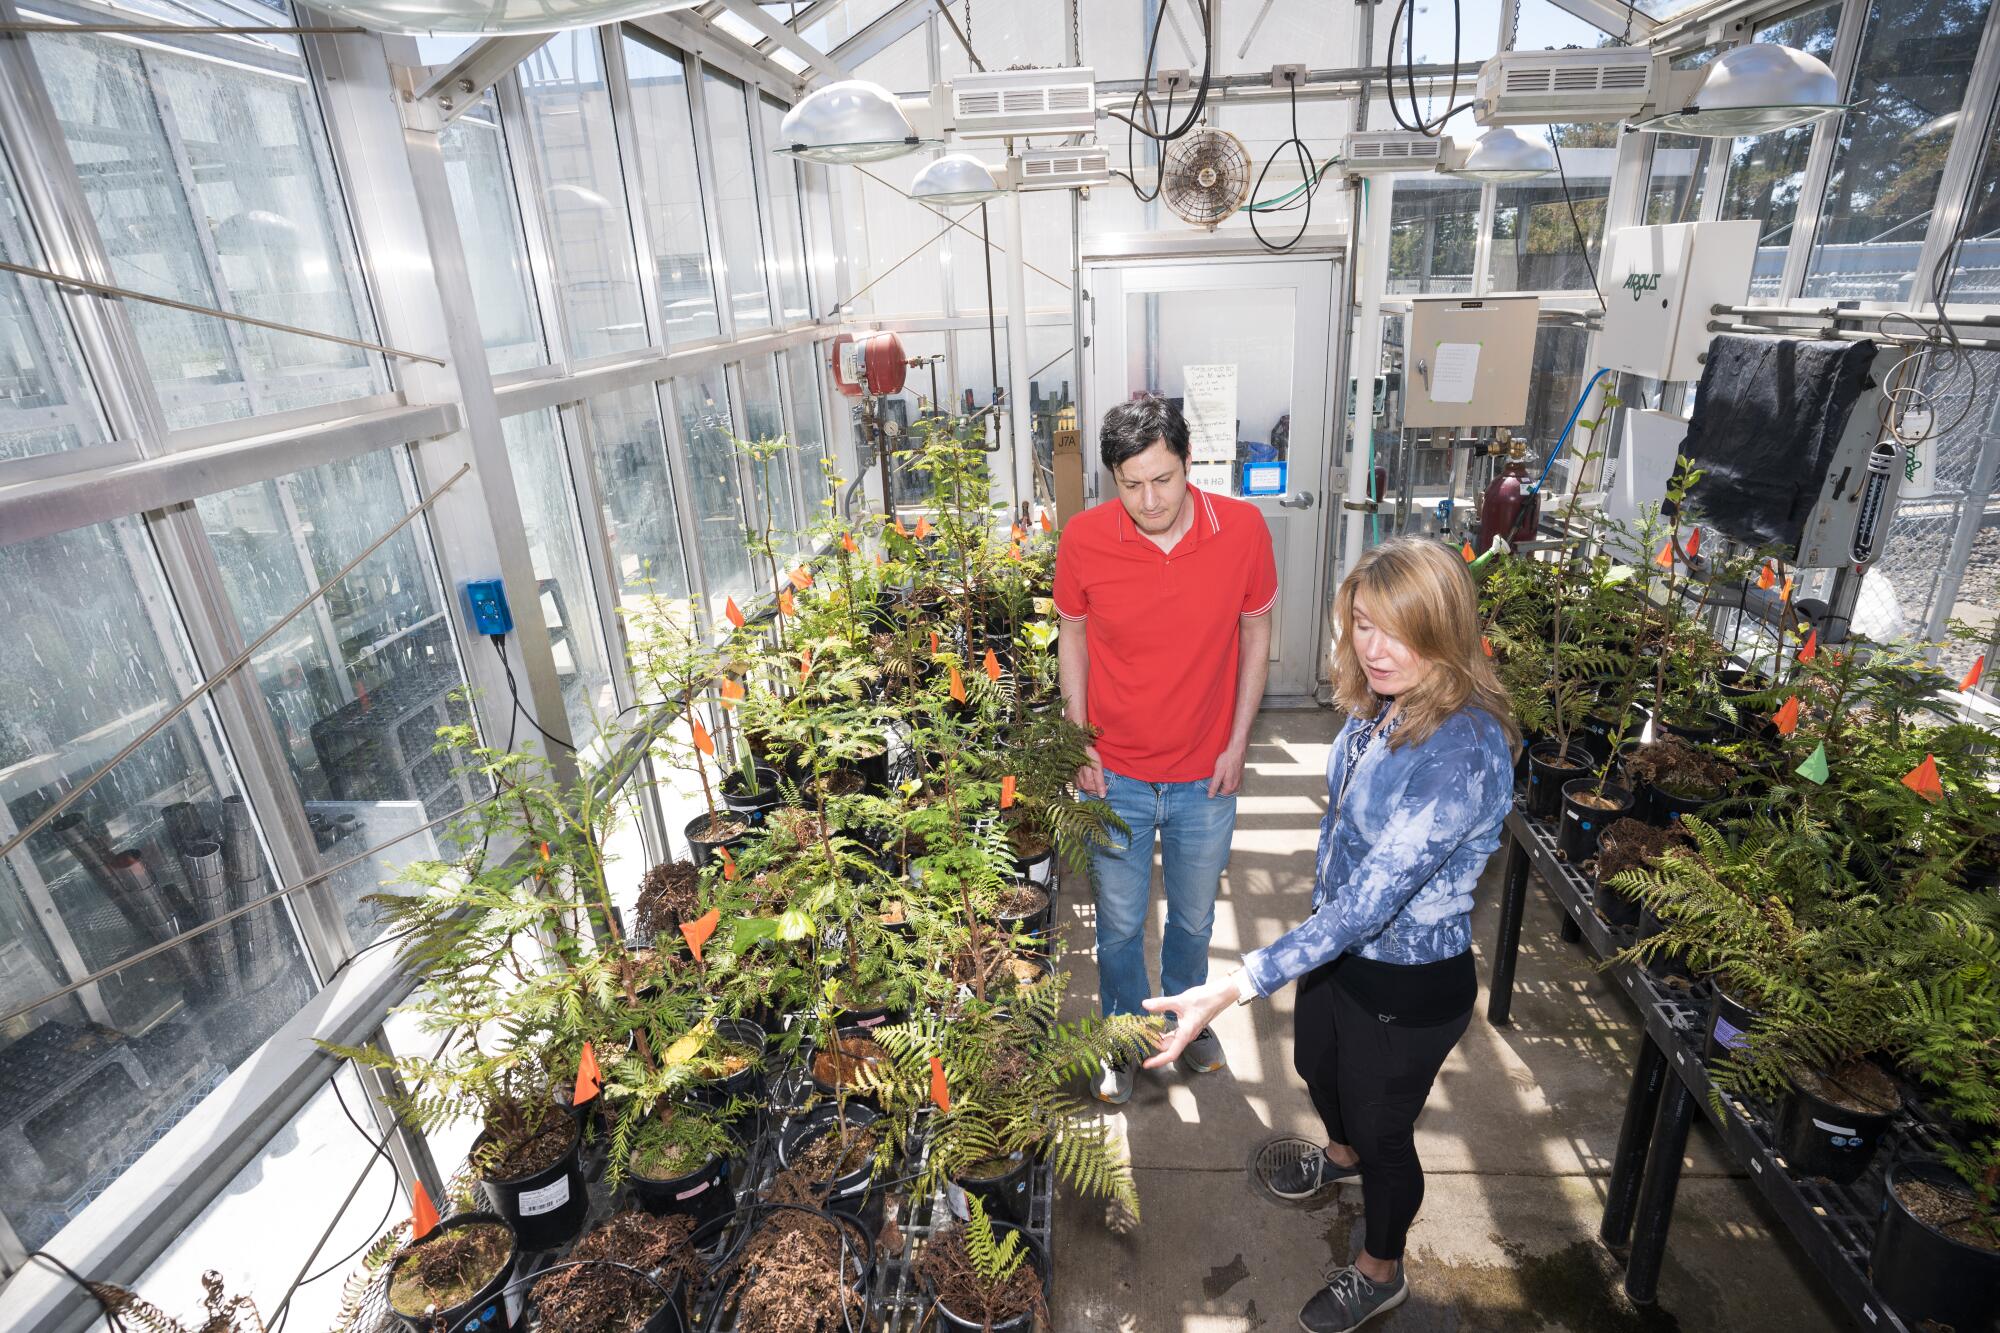 Two people look at plants in a greenhouse.